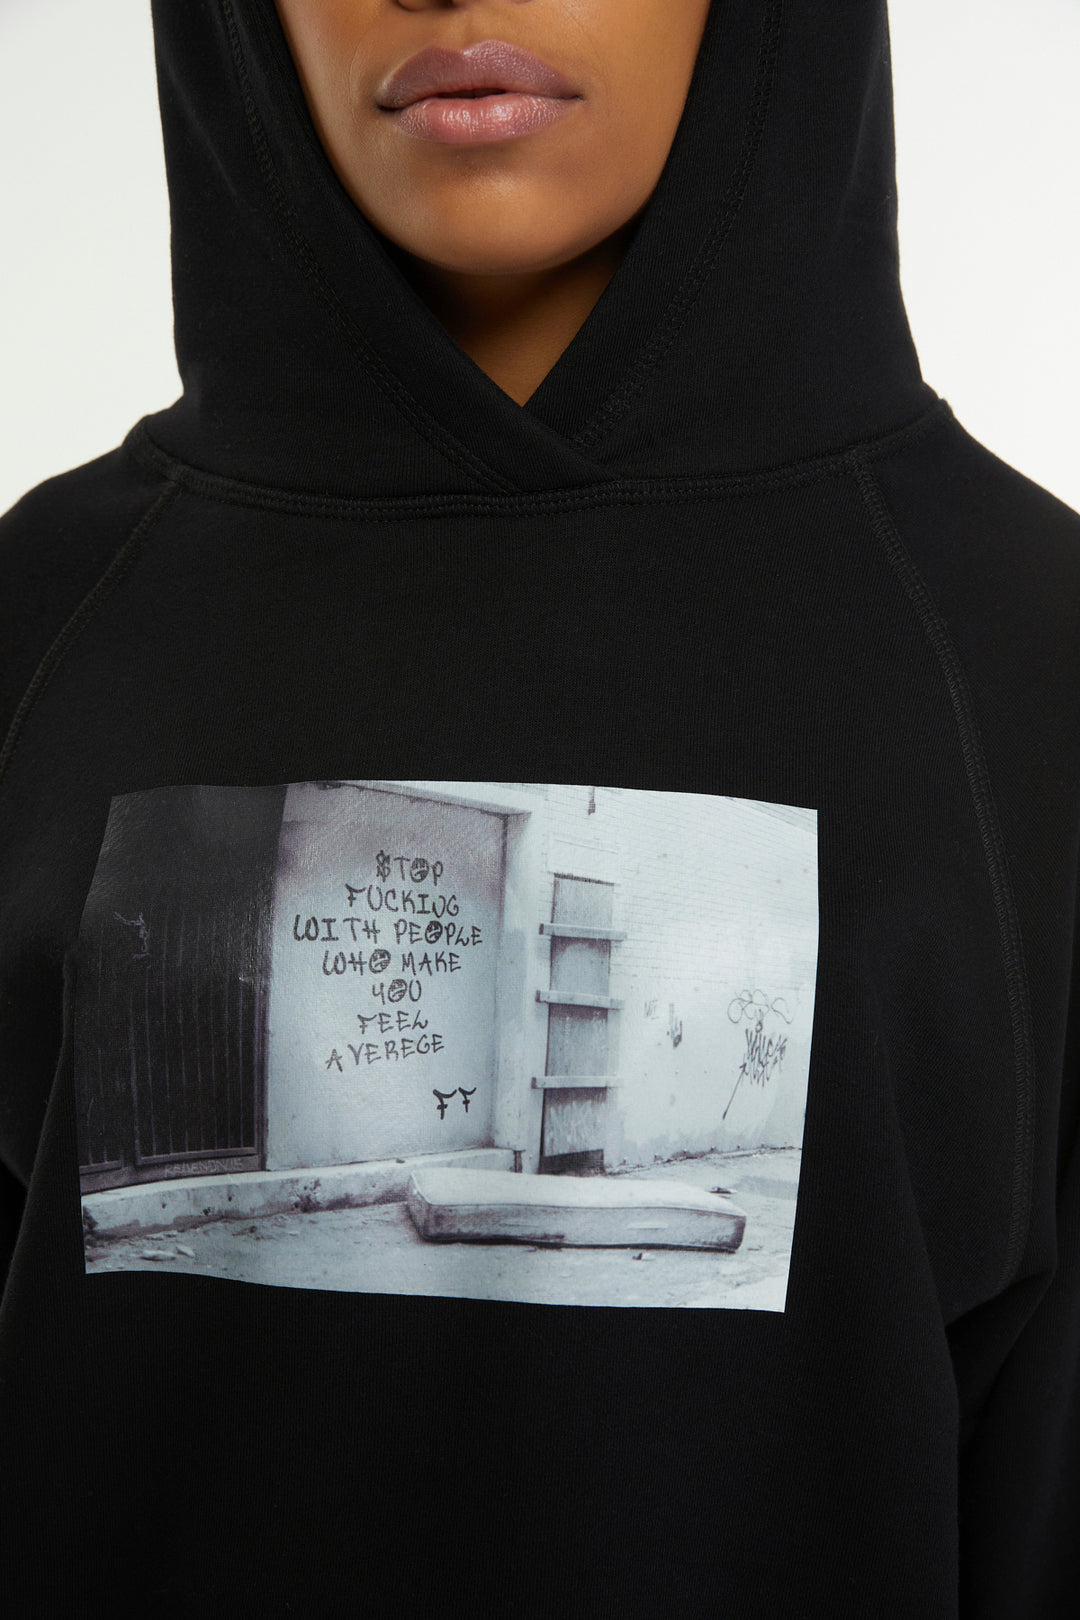 Stop Fucking with People Who Make You Feel Average / Crop Hoodie